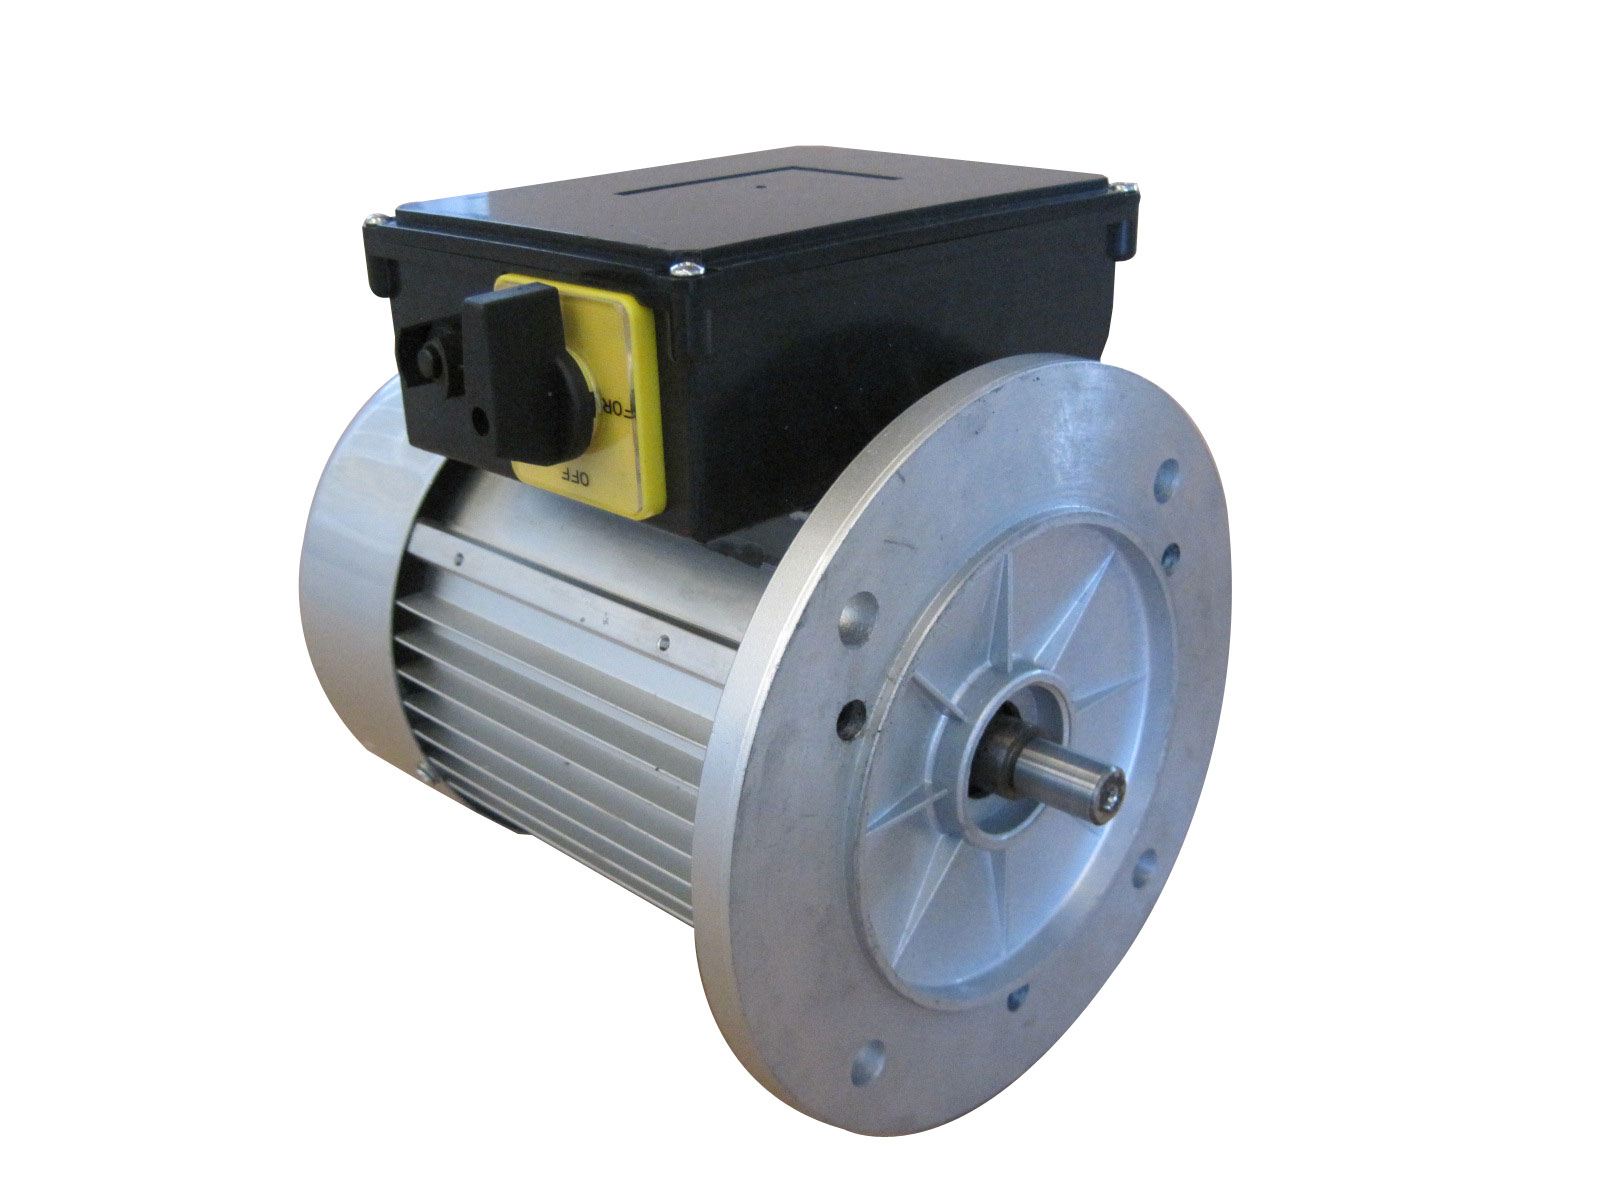 0.37 KW Meat Band Saw Motor